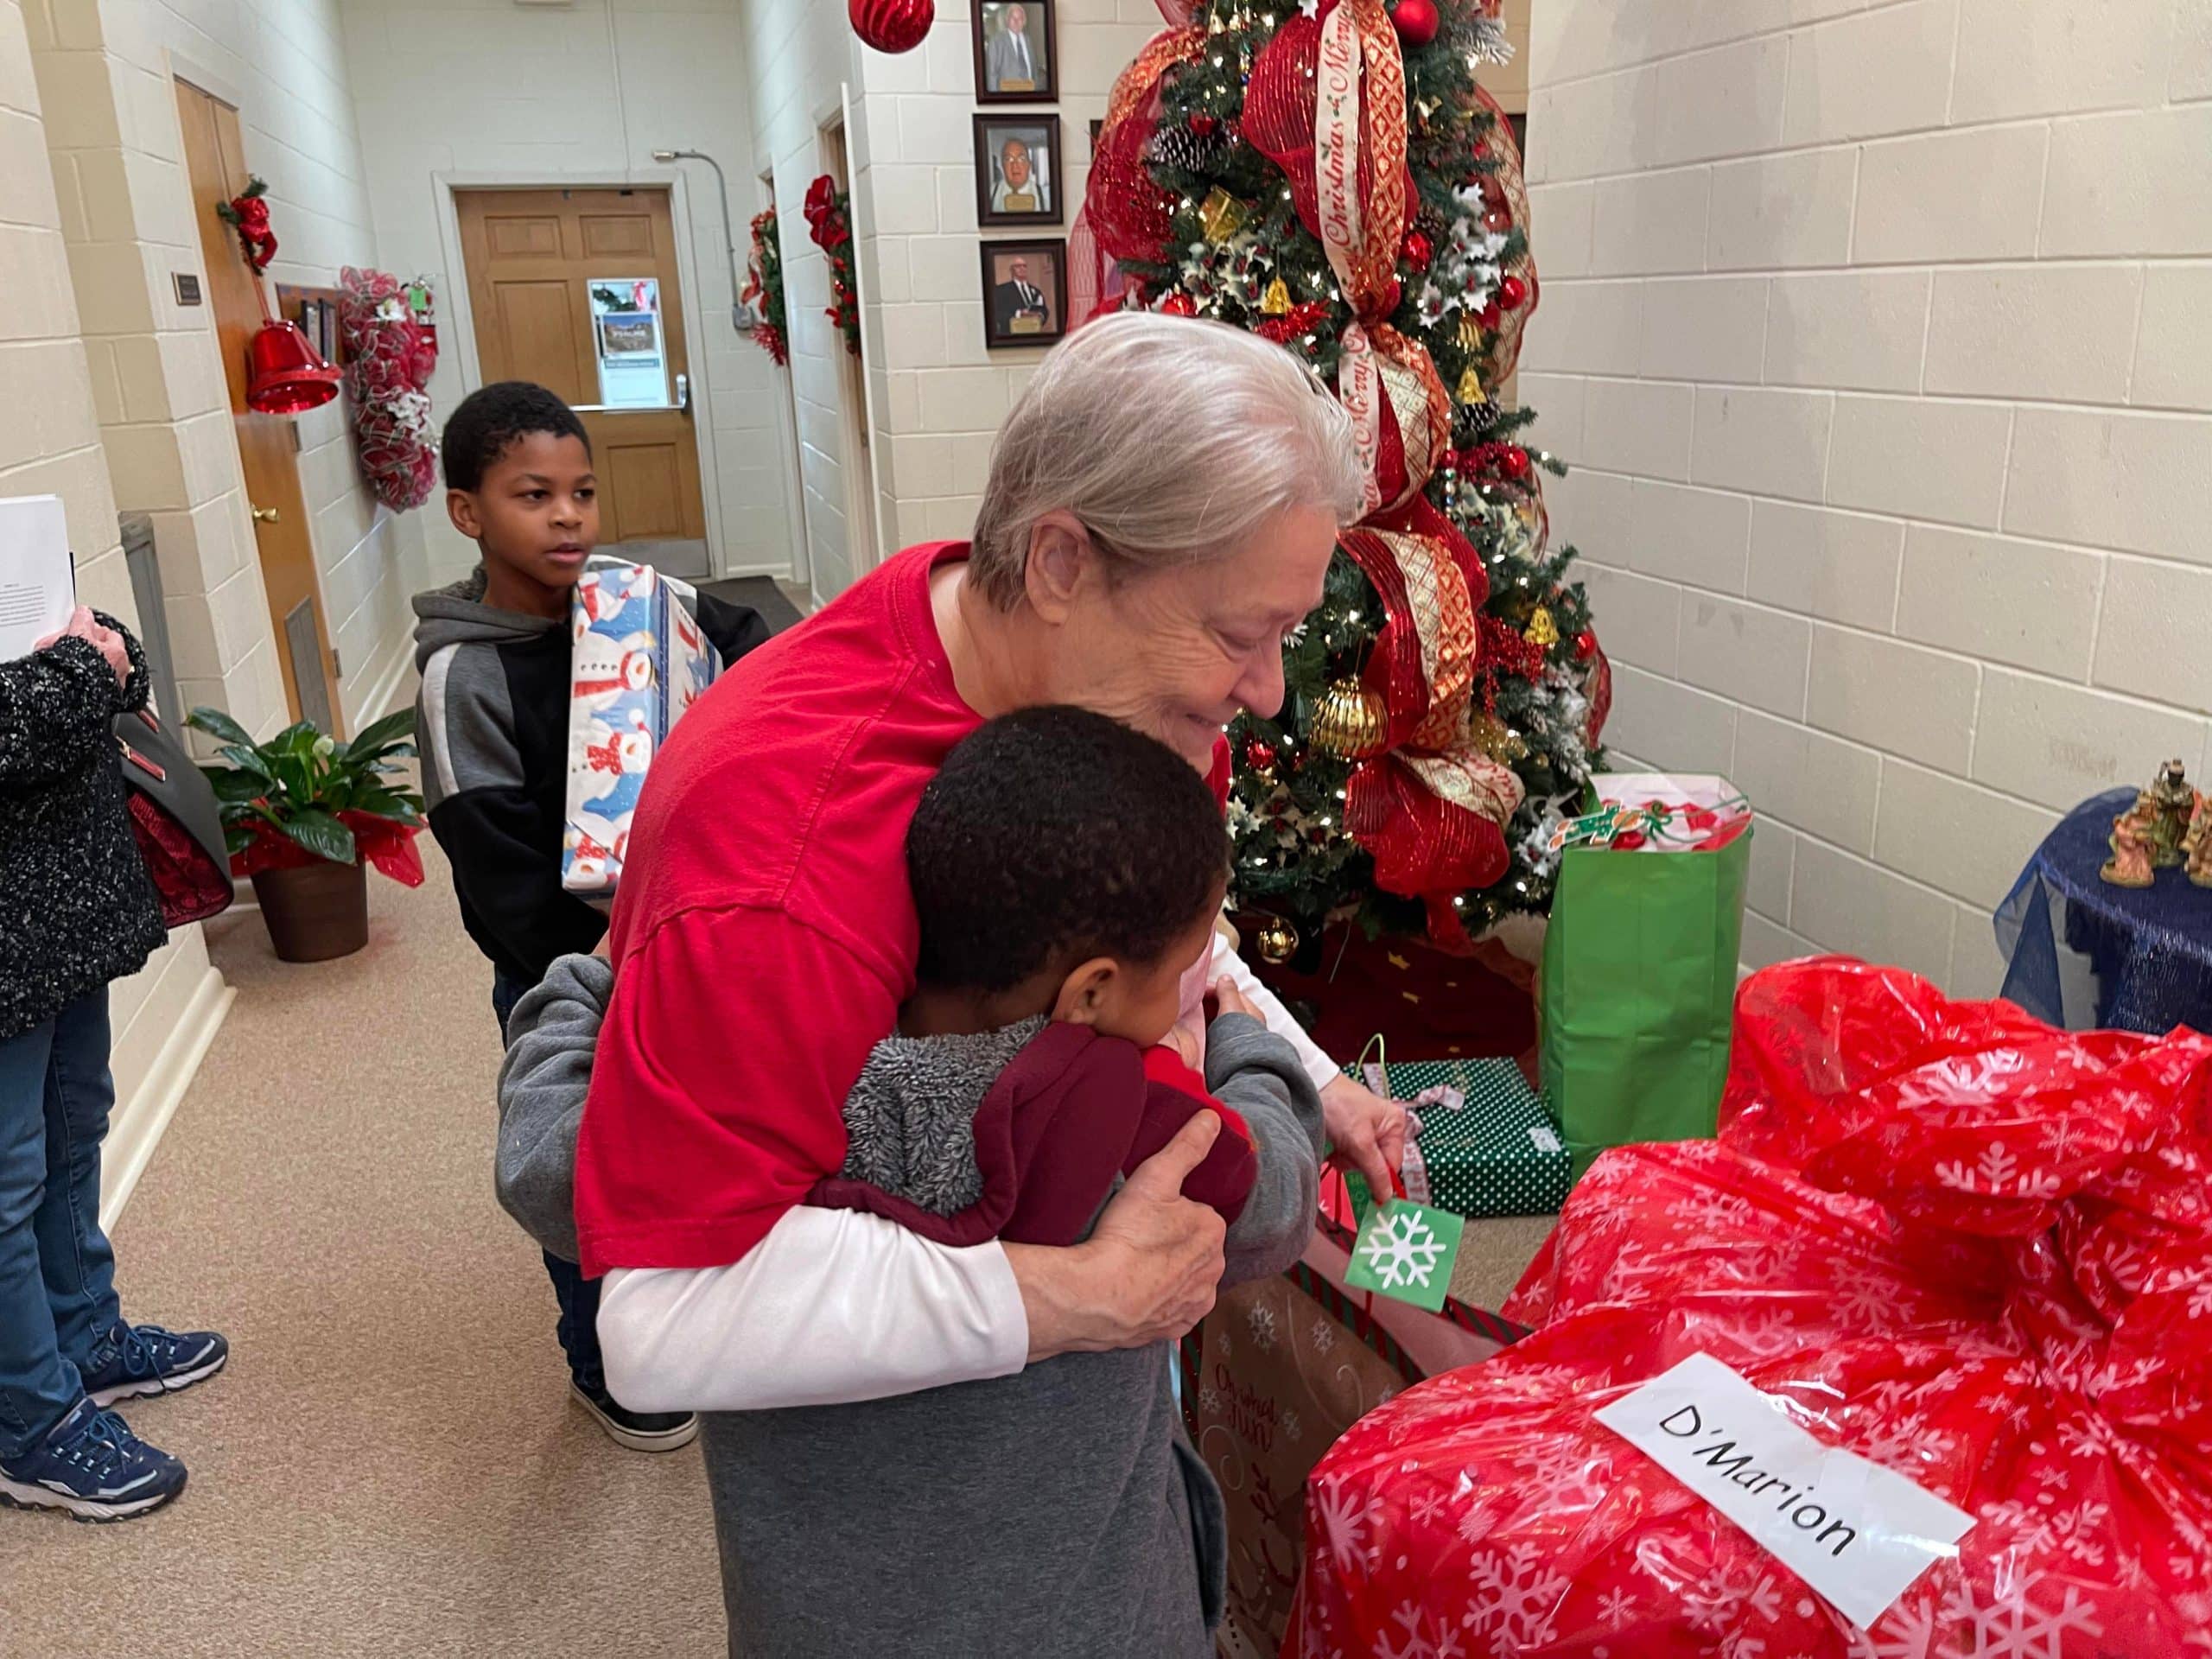 Thieda Edwards embracing a child during the Christmas gift giveaway at Homewood Baptist Church, Alexandria. Brian Blackwell photo